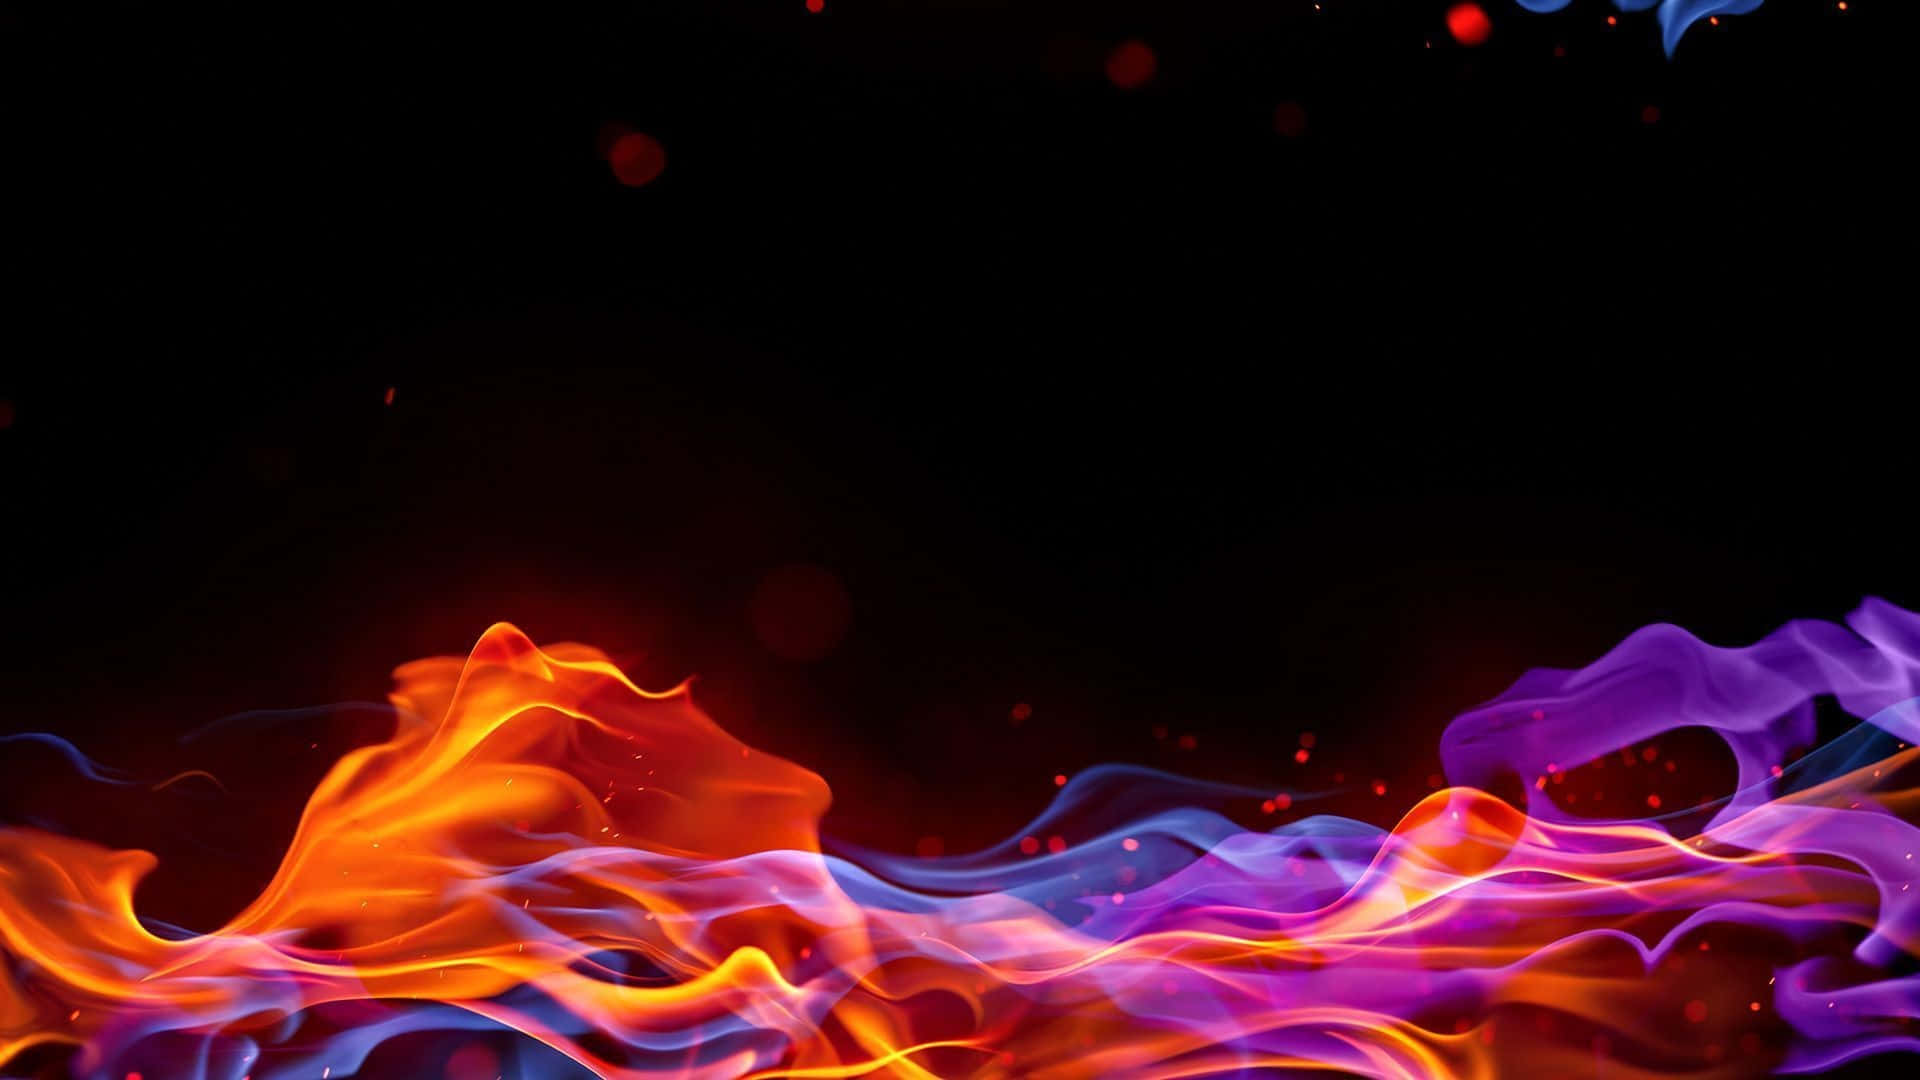 Bright Red and Blue Fire Roaring Wallpaper